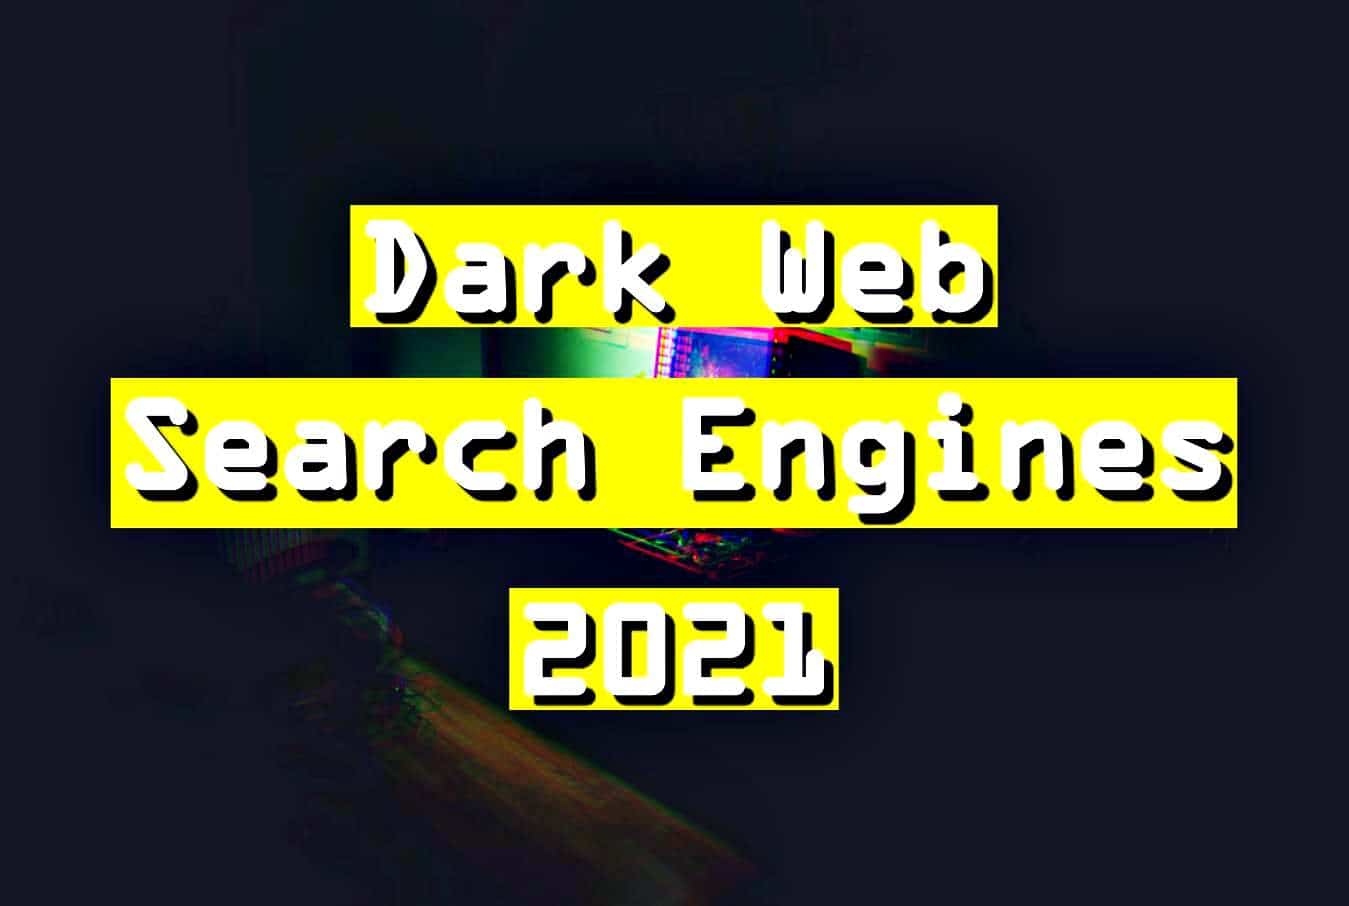 Search engines for darknet гирда аналоги тор браузер mega